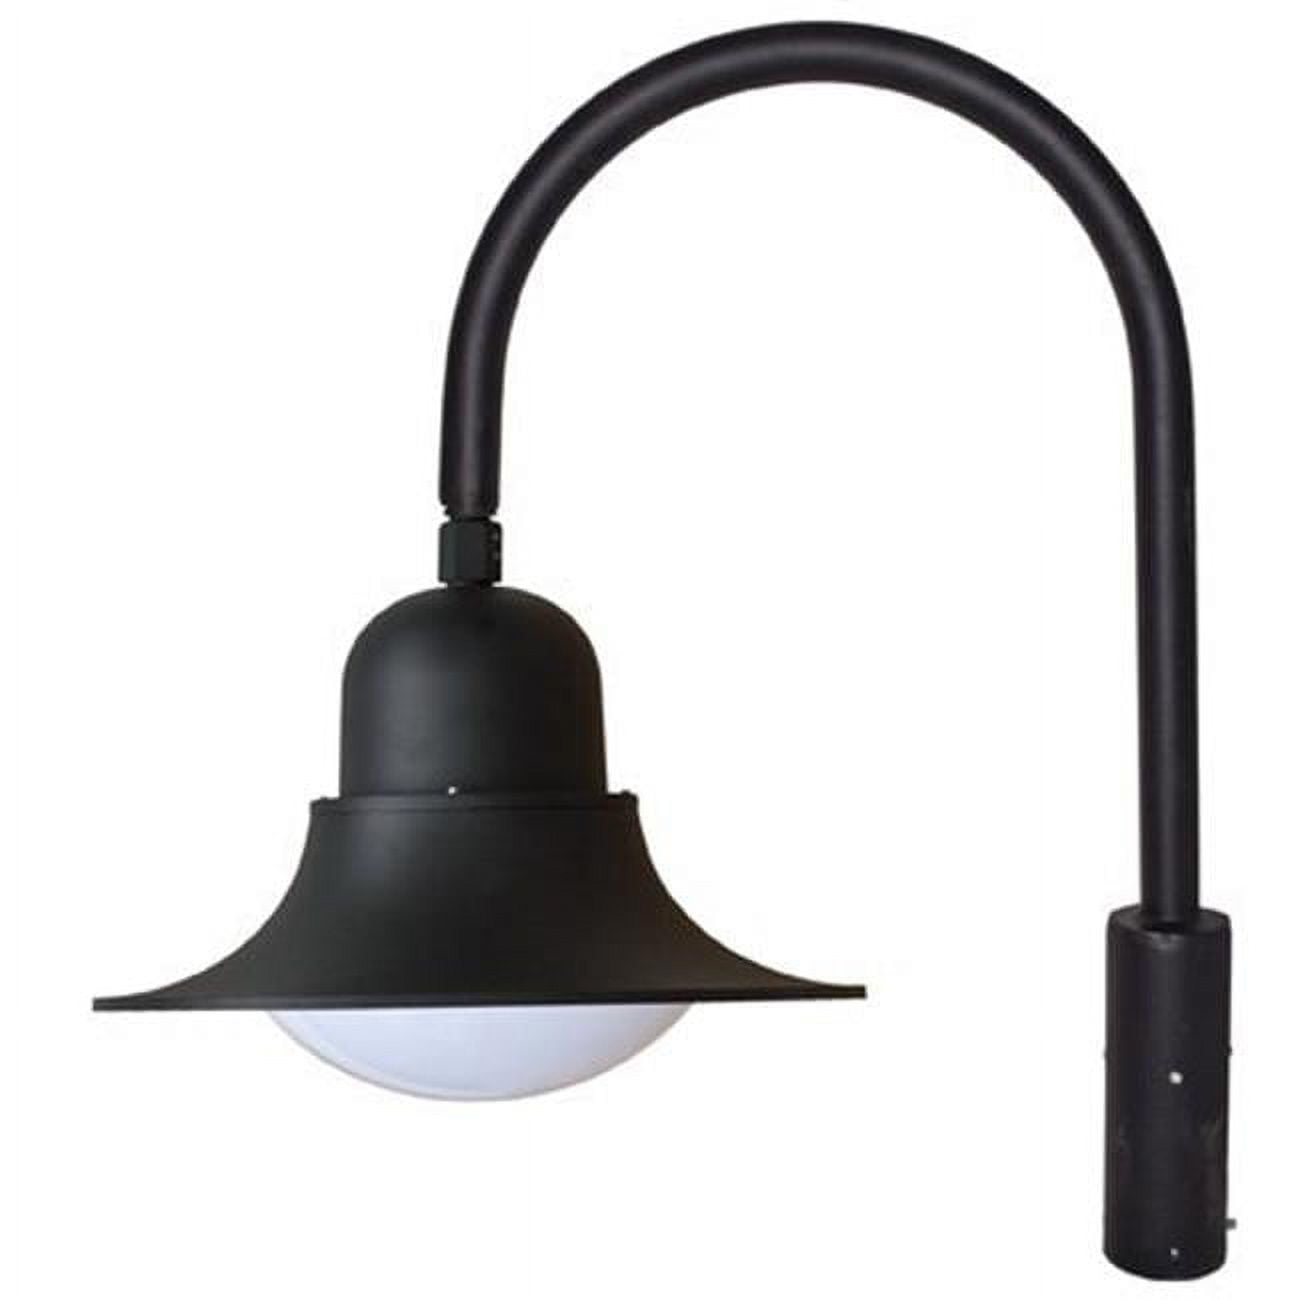 Picture of Dabmar Lighting GM613-B 50W 120V Powder Coated Cast Aluminum Post Top Light Fixture with High Pressure Sodium Lamp, Black - 35.50 x 22 x 30.92 in.